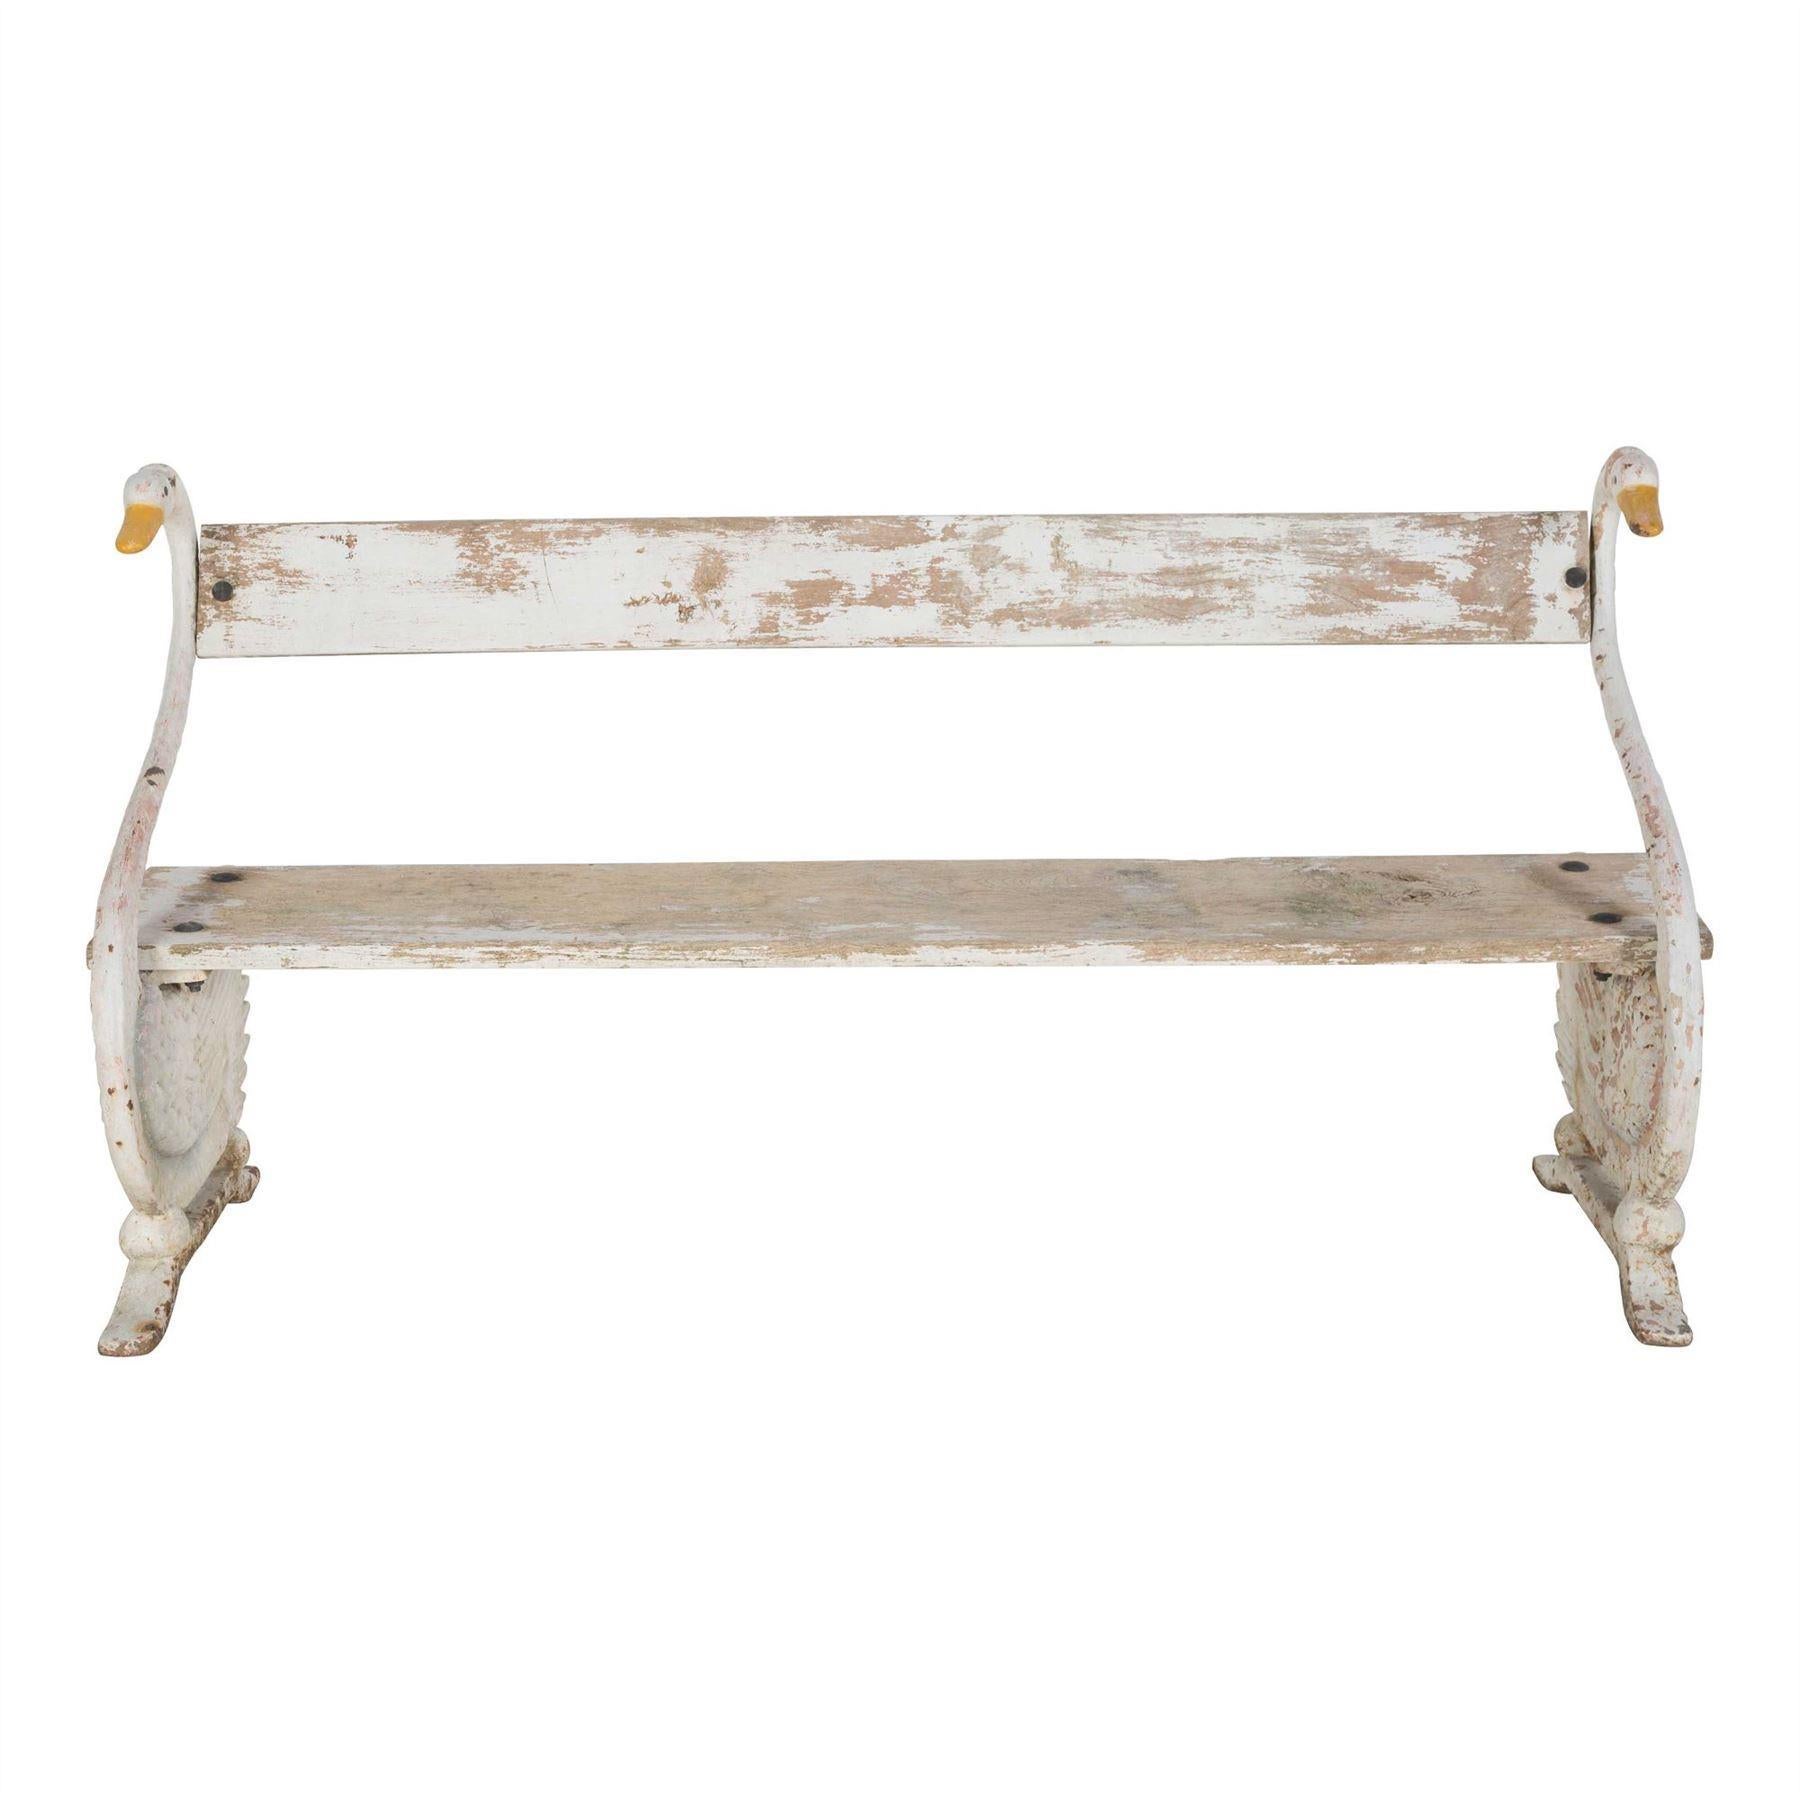 A 19th century French garden bench, circa 1880.

The original oak seat and backrest are supported by a pair of iron swans in their original paint.

Wonderful patina to both the wood and the paint on the swans. Very strong and sturdy condition to